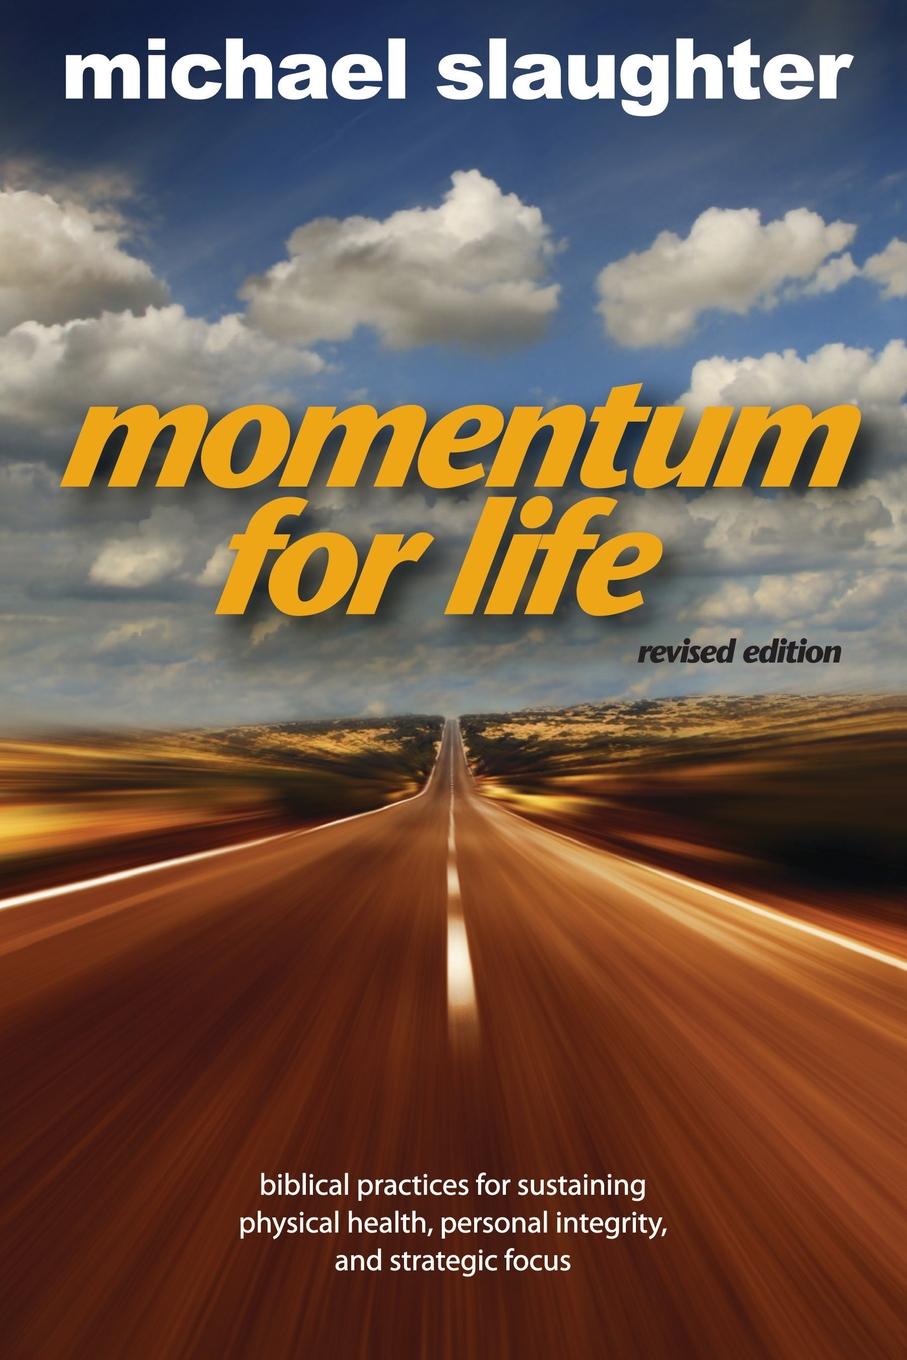 Momentum for Life. Biblical Principles for Sustaining Physical Health, Personal Integrity, and Strategic Focus